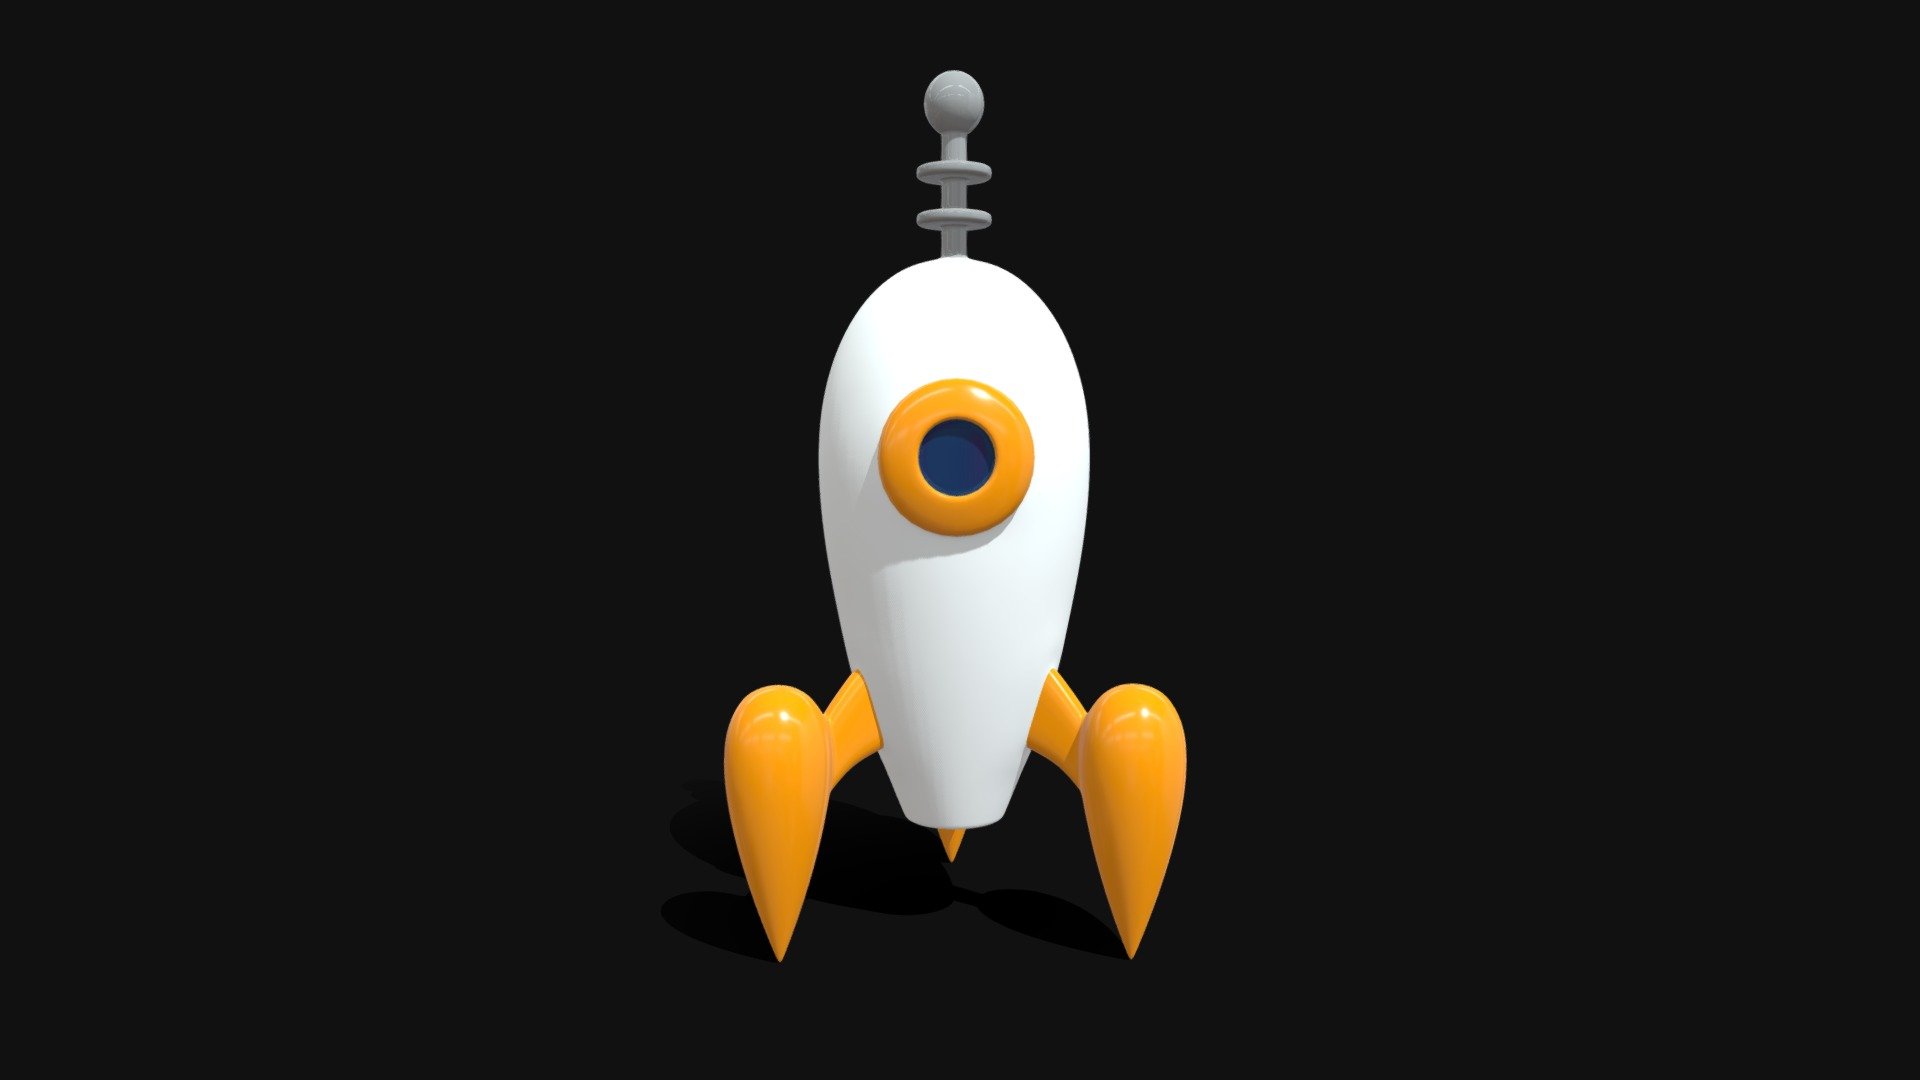 Space Rocket Low Poly Icon Style.
Only quad polygons with correct topology, supports multiple subdivisions.
Archive file contains: .c4d, .fbx, .obj, .mtl, .stl + textures.

! For better results please use subdivision surface without UV smoothing ! - Space Rocket 6 - 3D model by Andrey Sannikov (@ritordp) 3d model